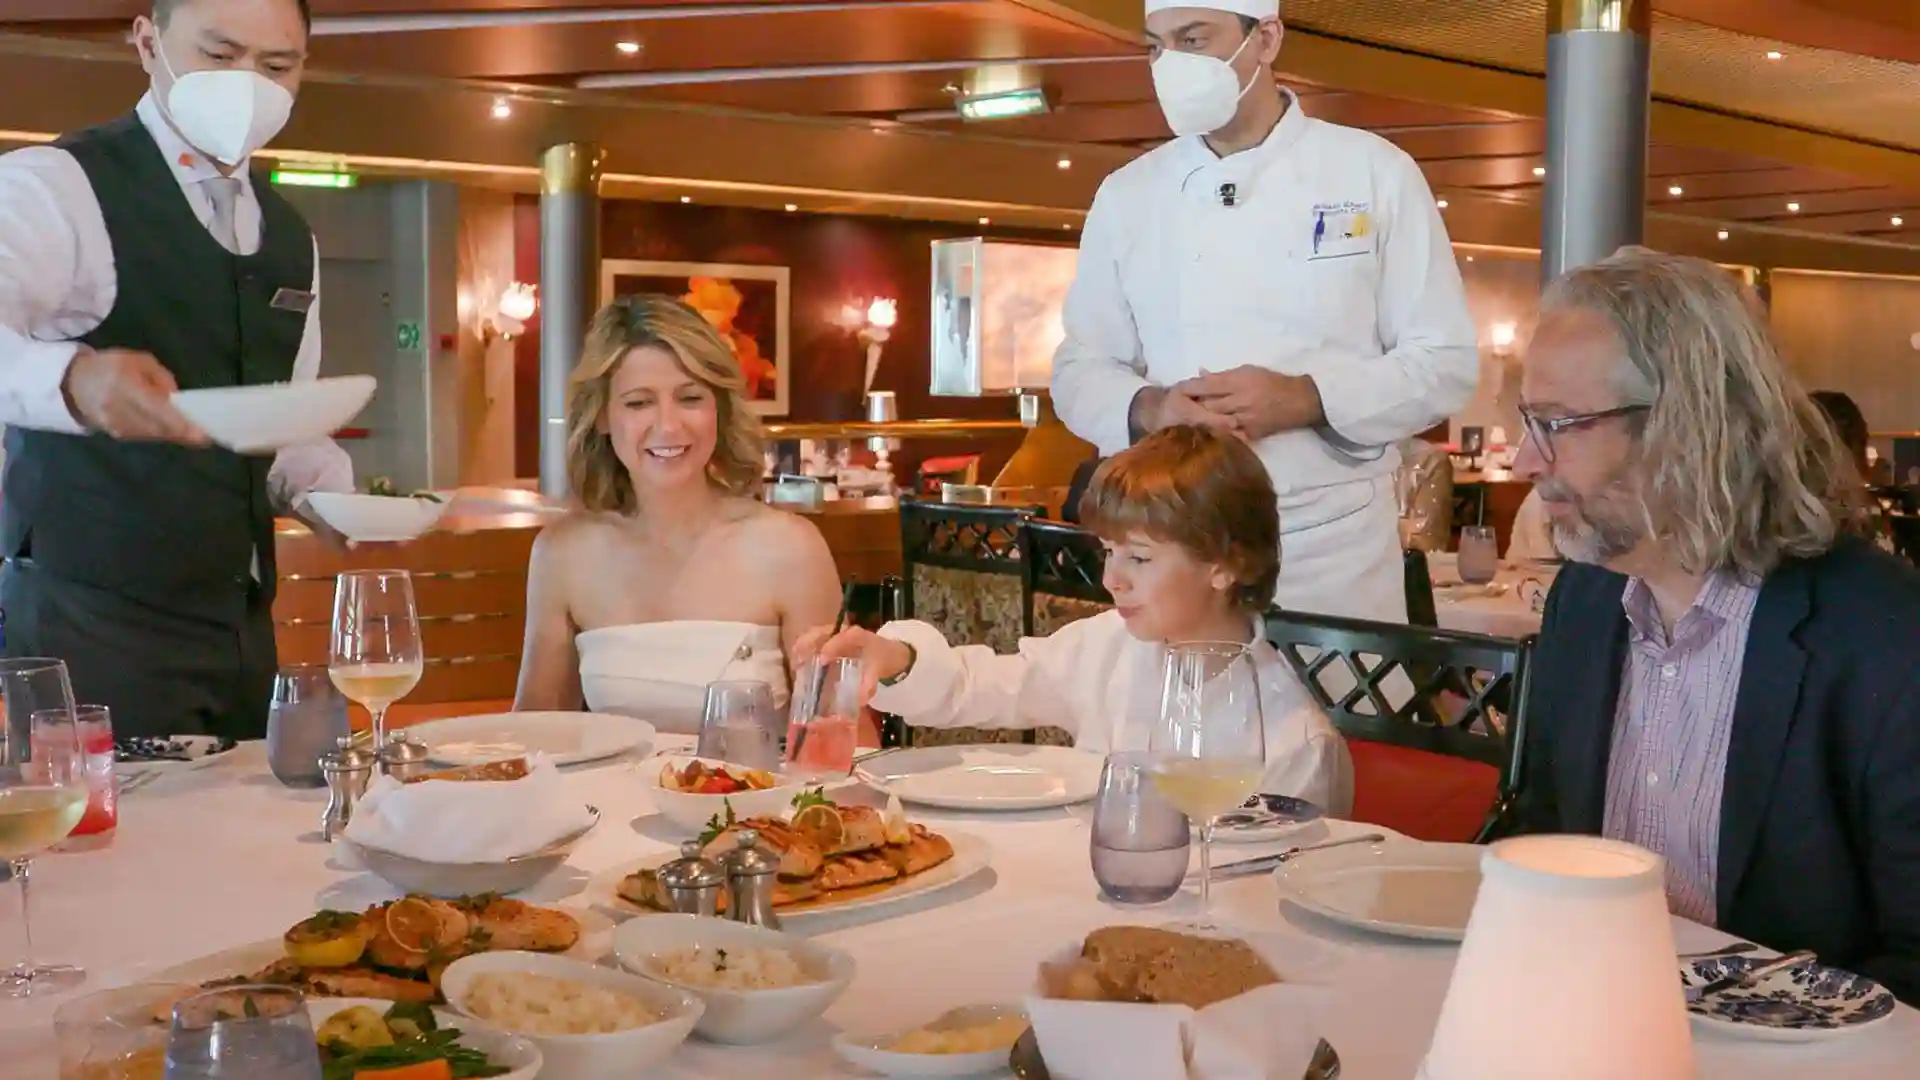 Travel expert Samantha Brown and family in dining room on Holland America Line cruise ship.